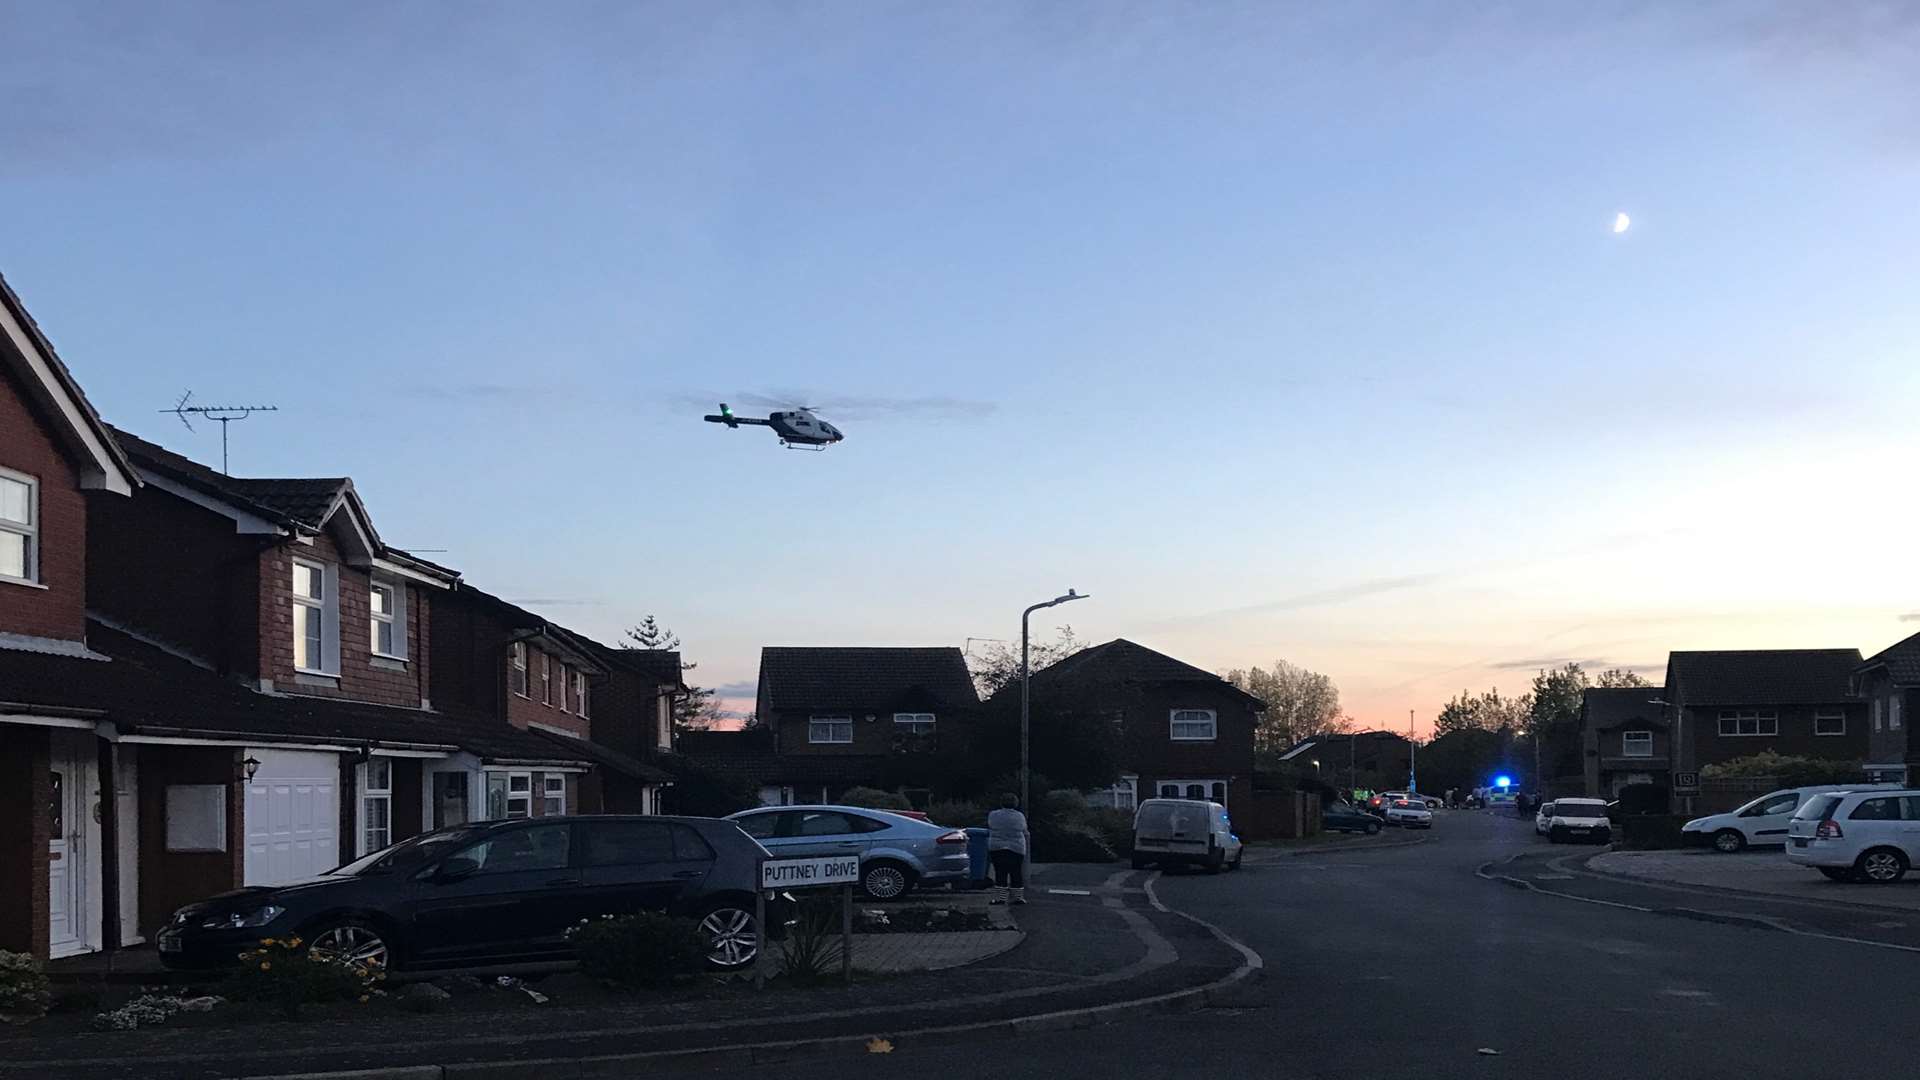 A Kent Air Ambulance helicopter seen in Newman Drive and Putney Drive, Sittingbourne, this evening.